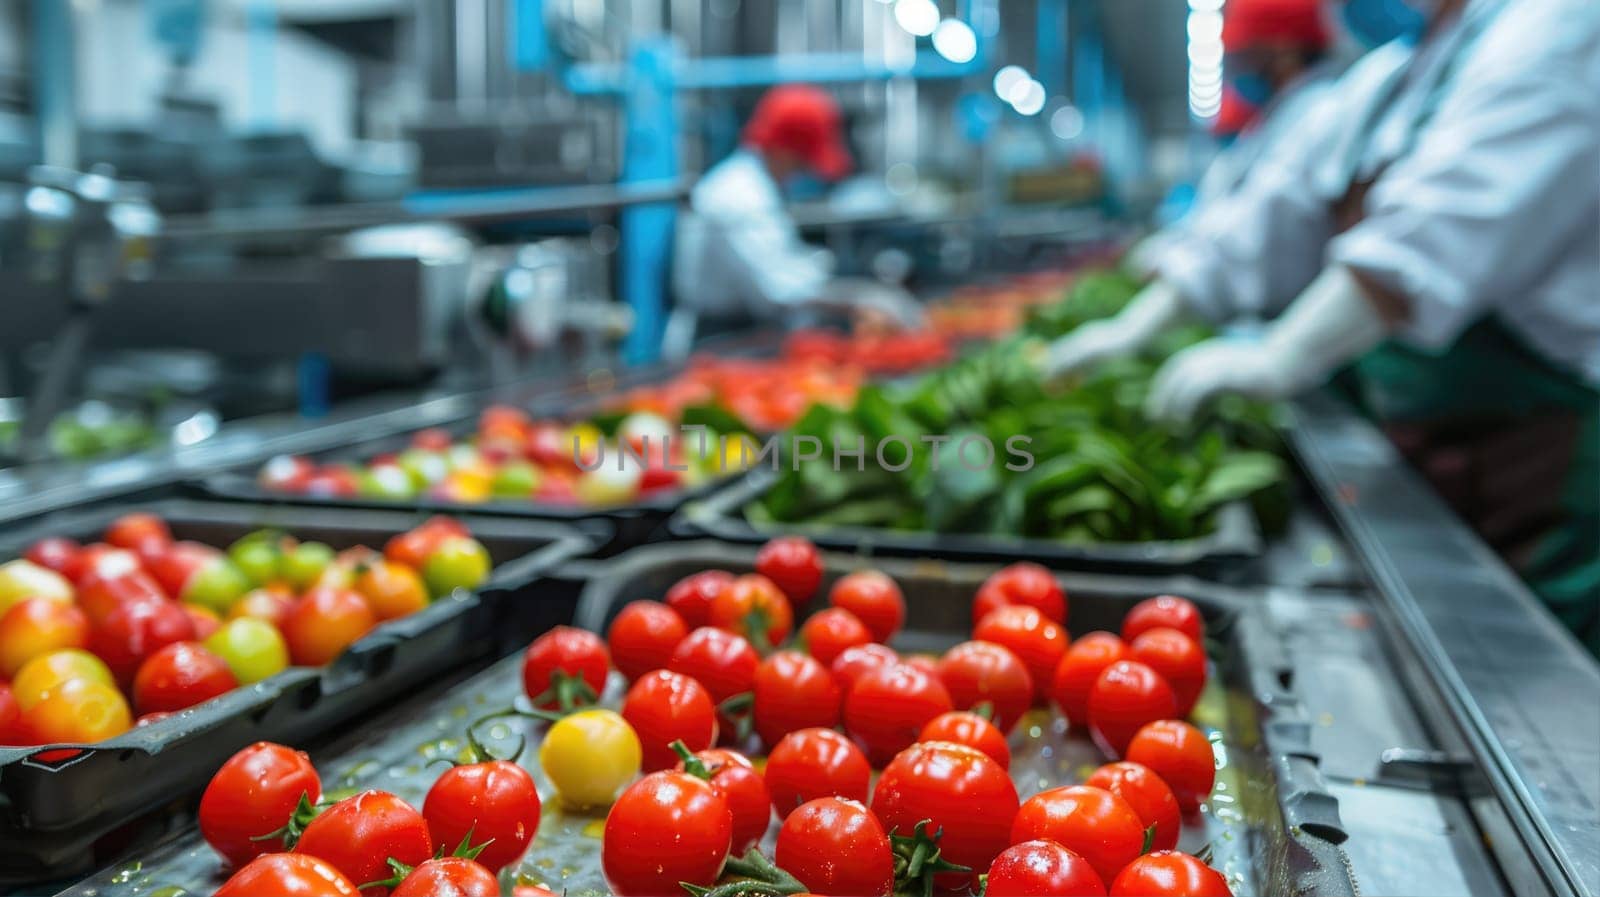 Conveyor belt in food factory with tomatoes and other vegetables for processing by natali_brill